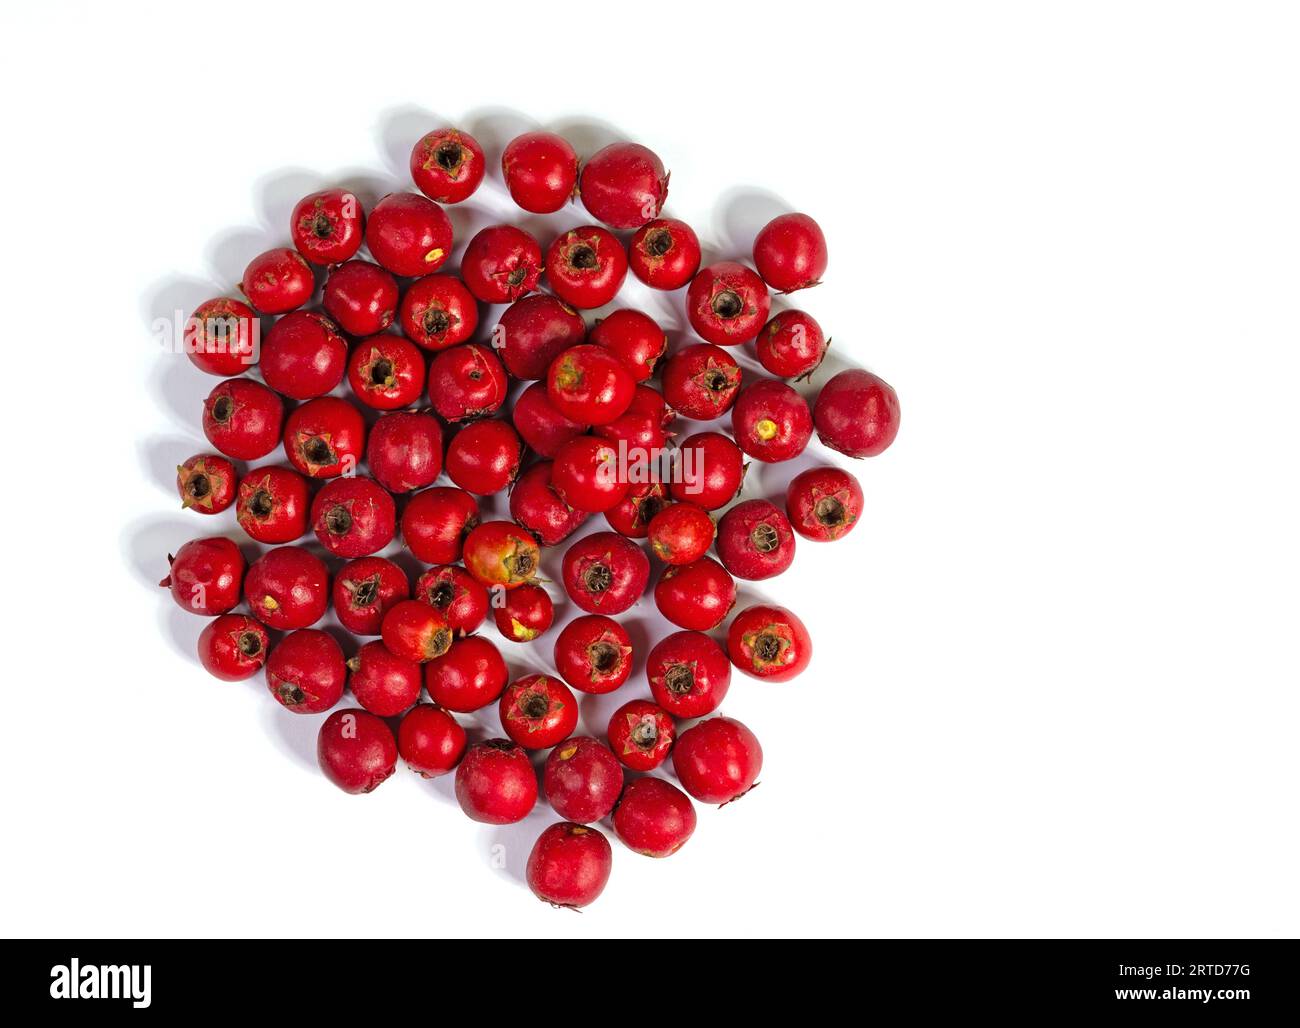 Hawthorn fruits against a white background Stock Photo